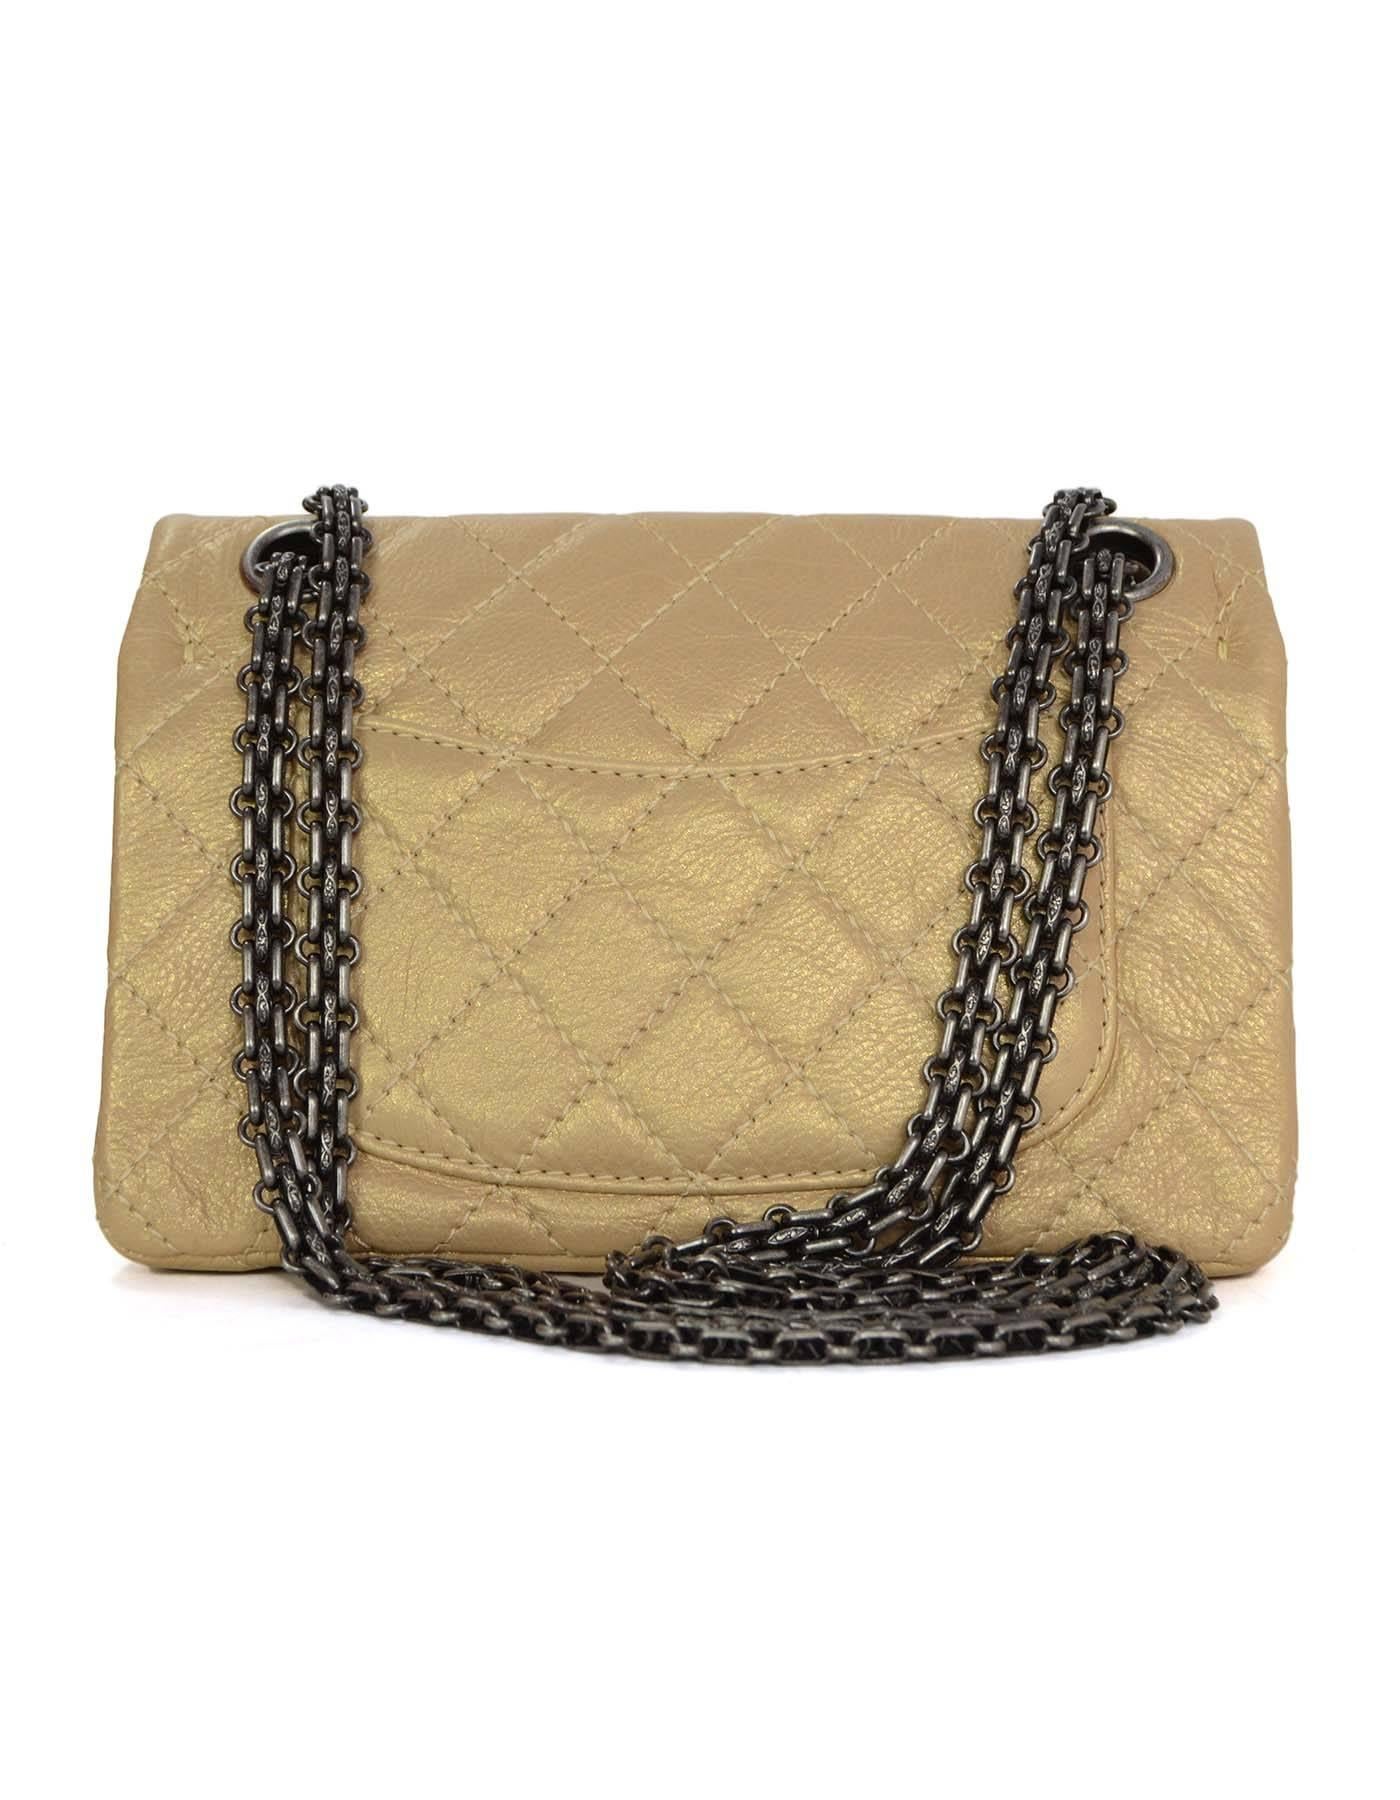 Brown Chanel Rare Collectors Gold Distressed Lucky Charms ReIssue Bag 2.55 rt. $8, 775